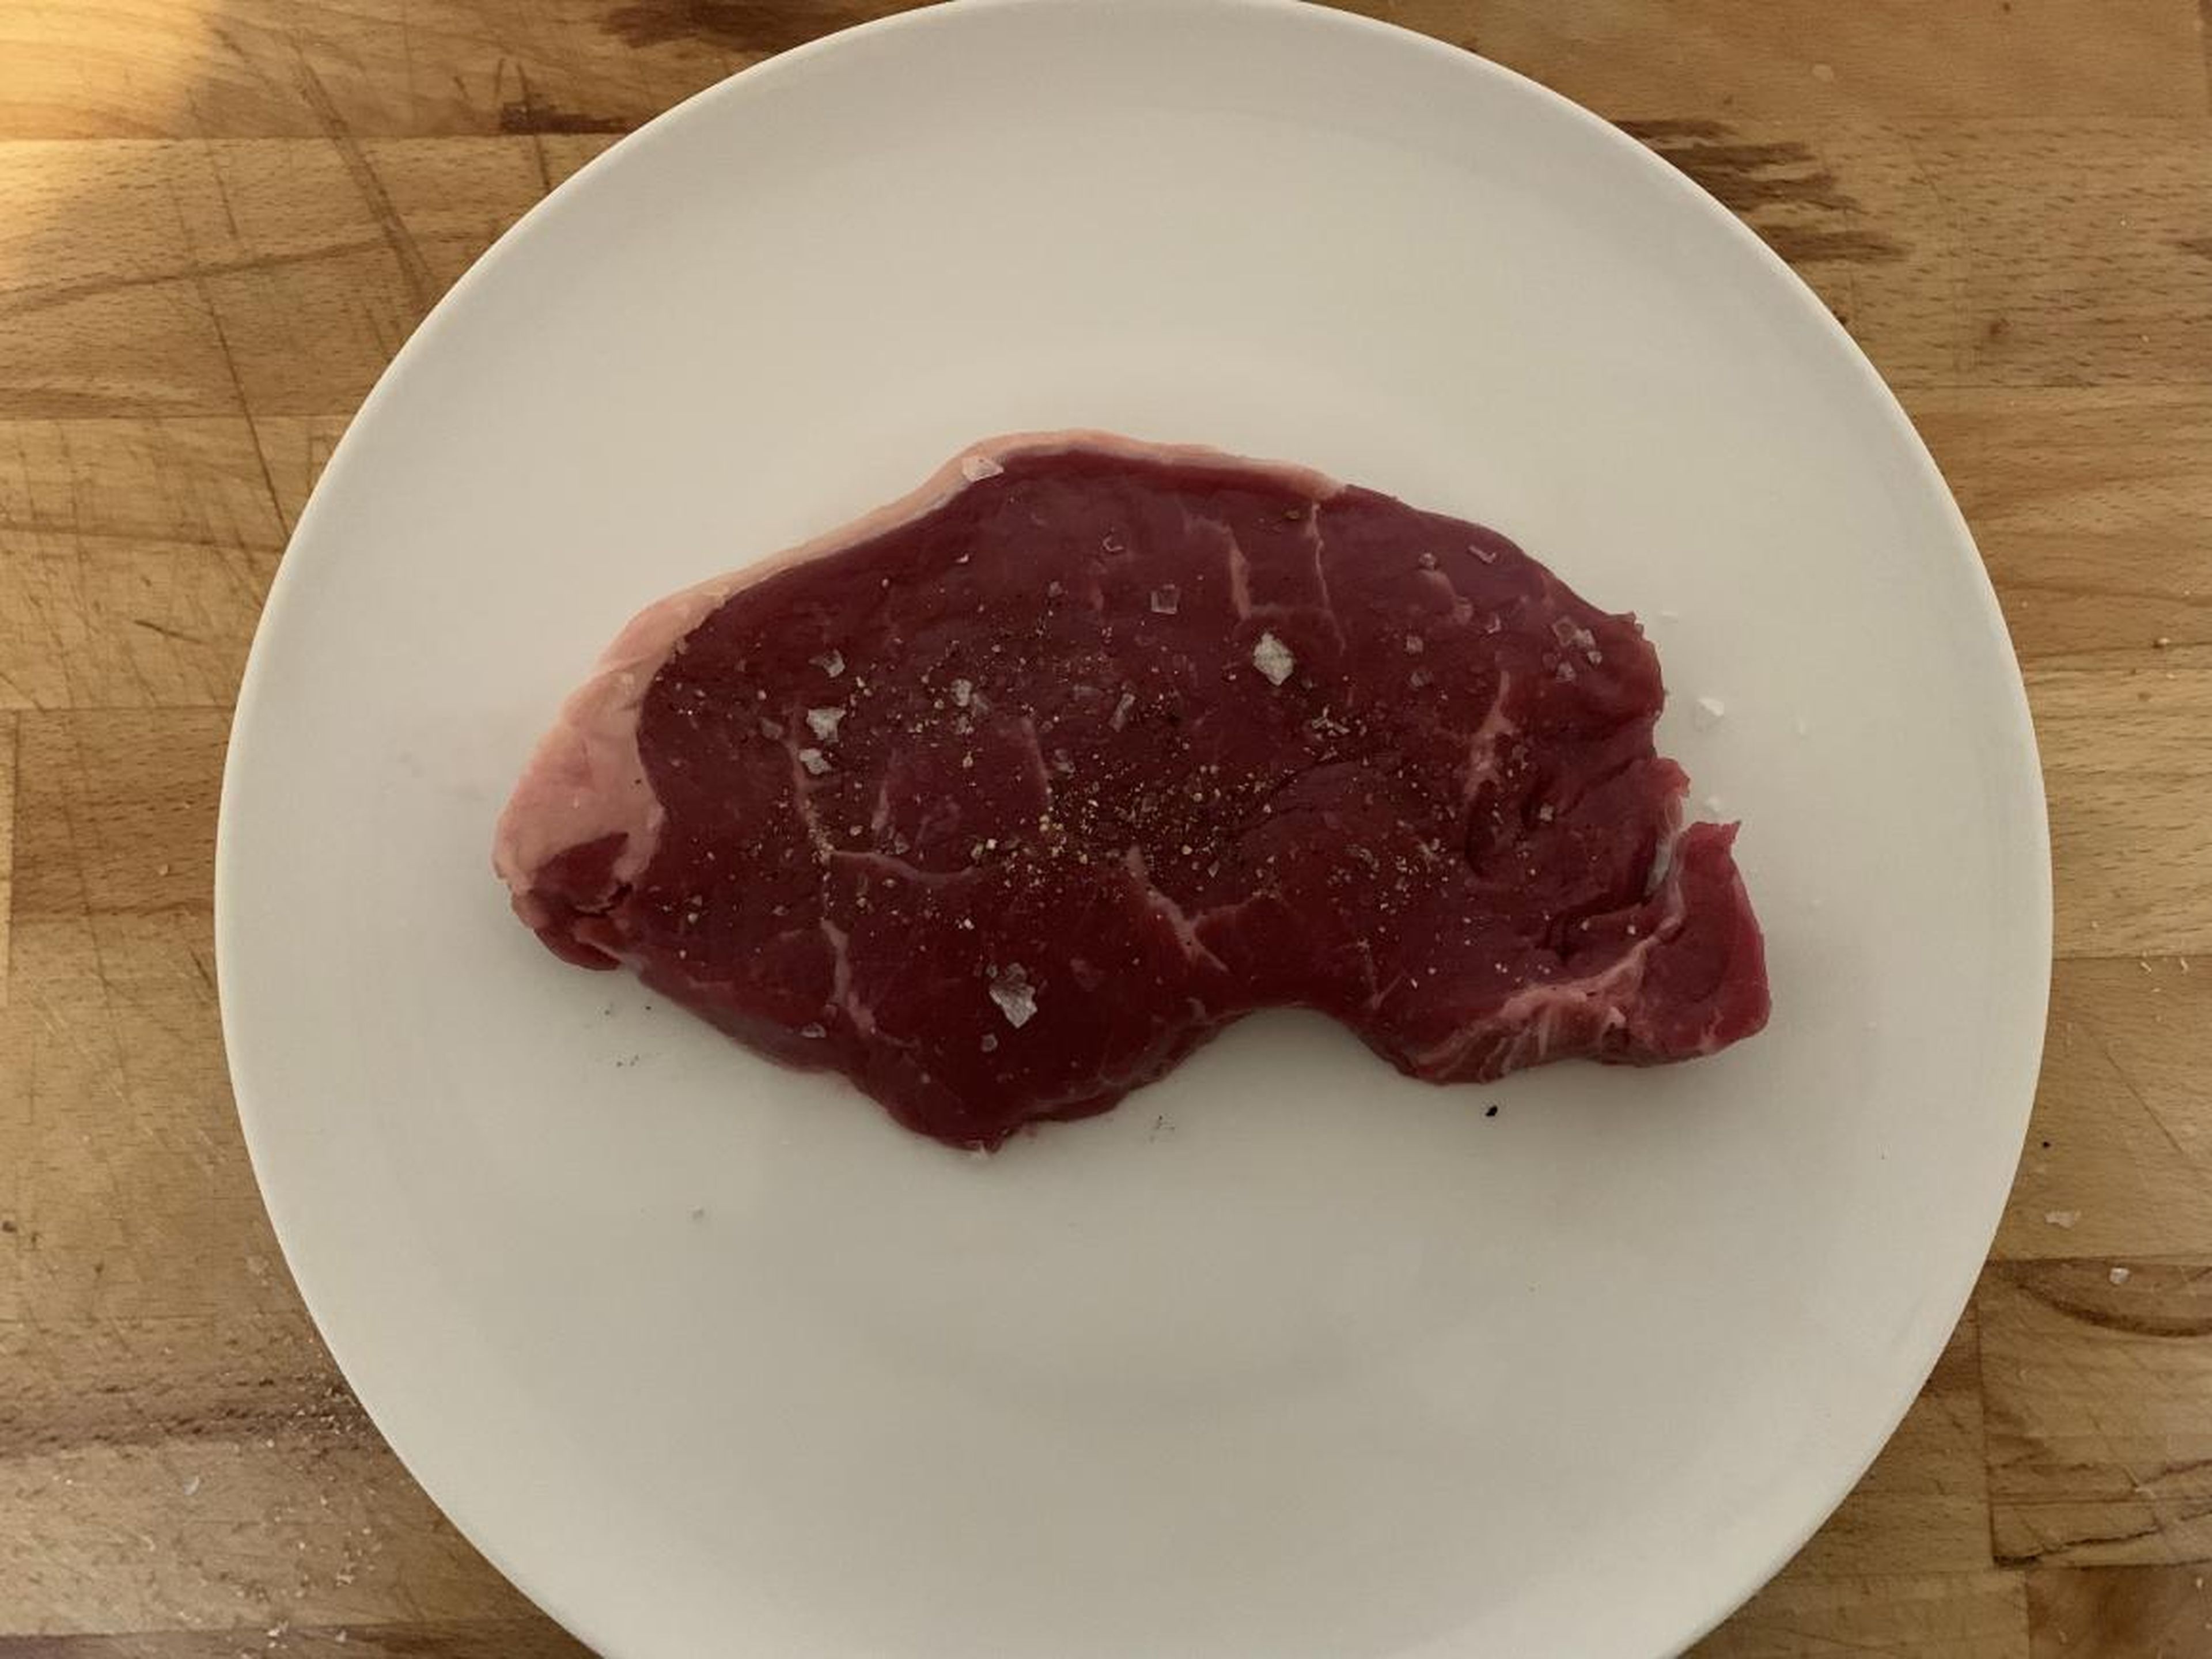 "I usually pre-massage the steak with olive oil and salt and pepper before frying, but instructions said to leave the oil to prevent a dried out steak. So I seasoned with Maldon sea salt flakes and cracked black pepper on both